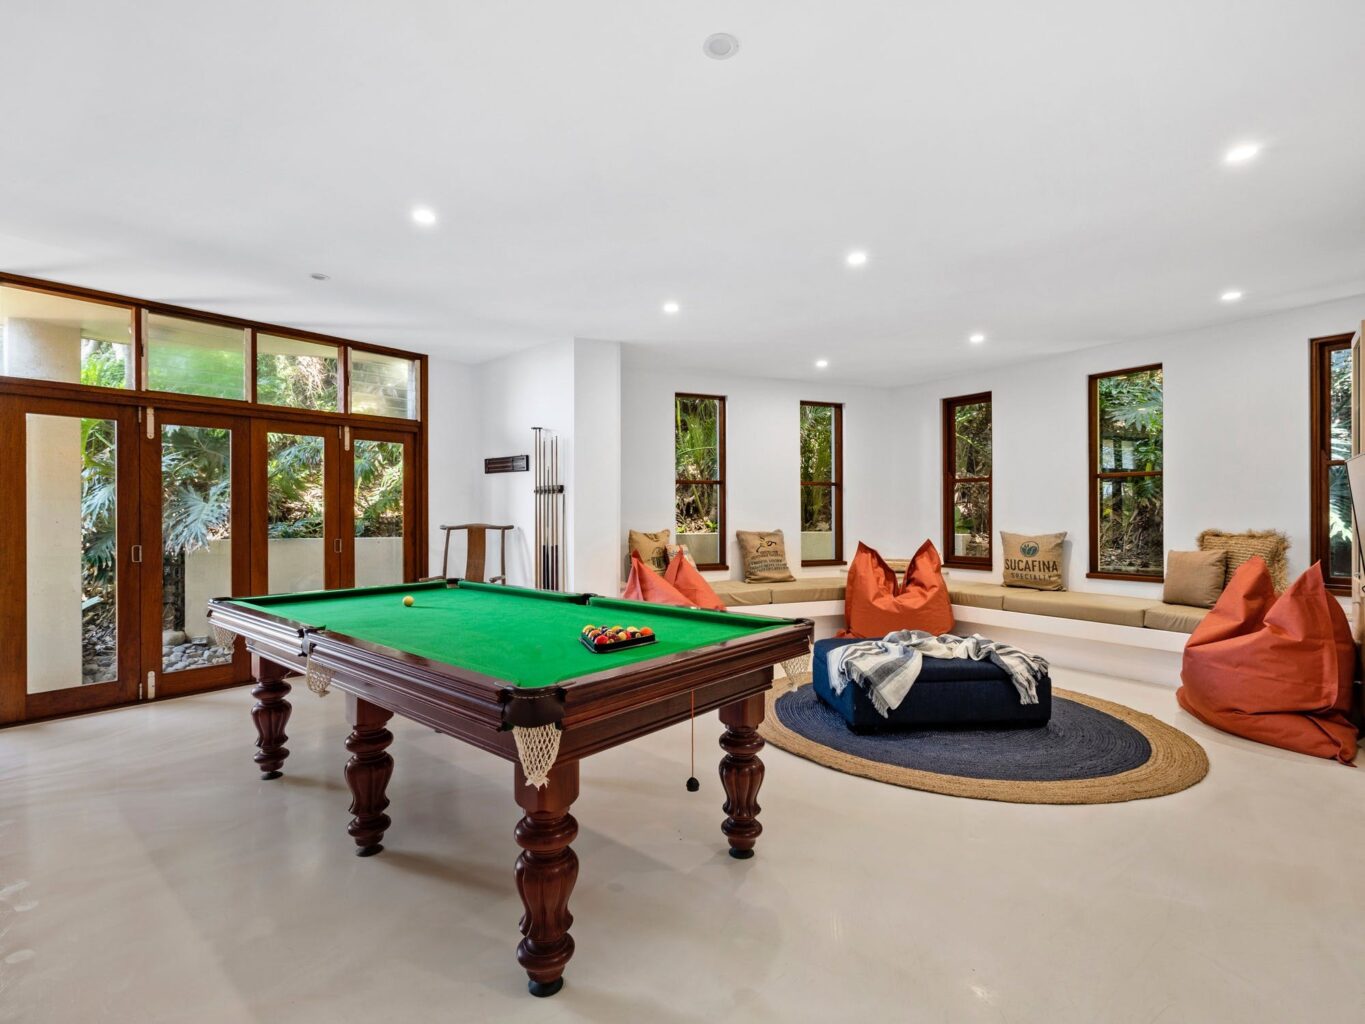 Family games room with pool table